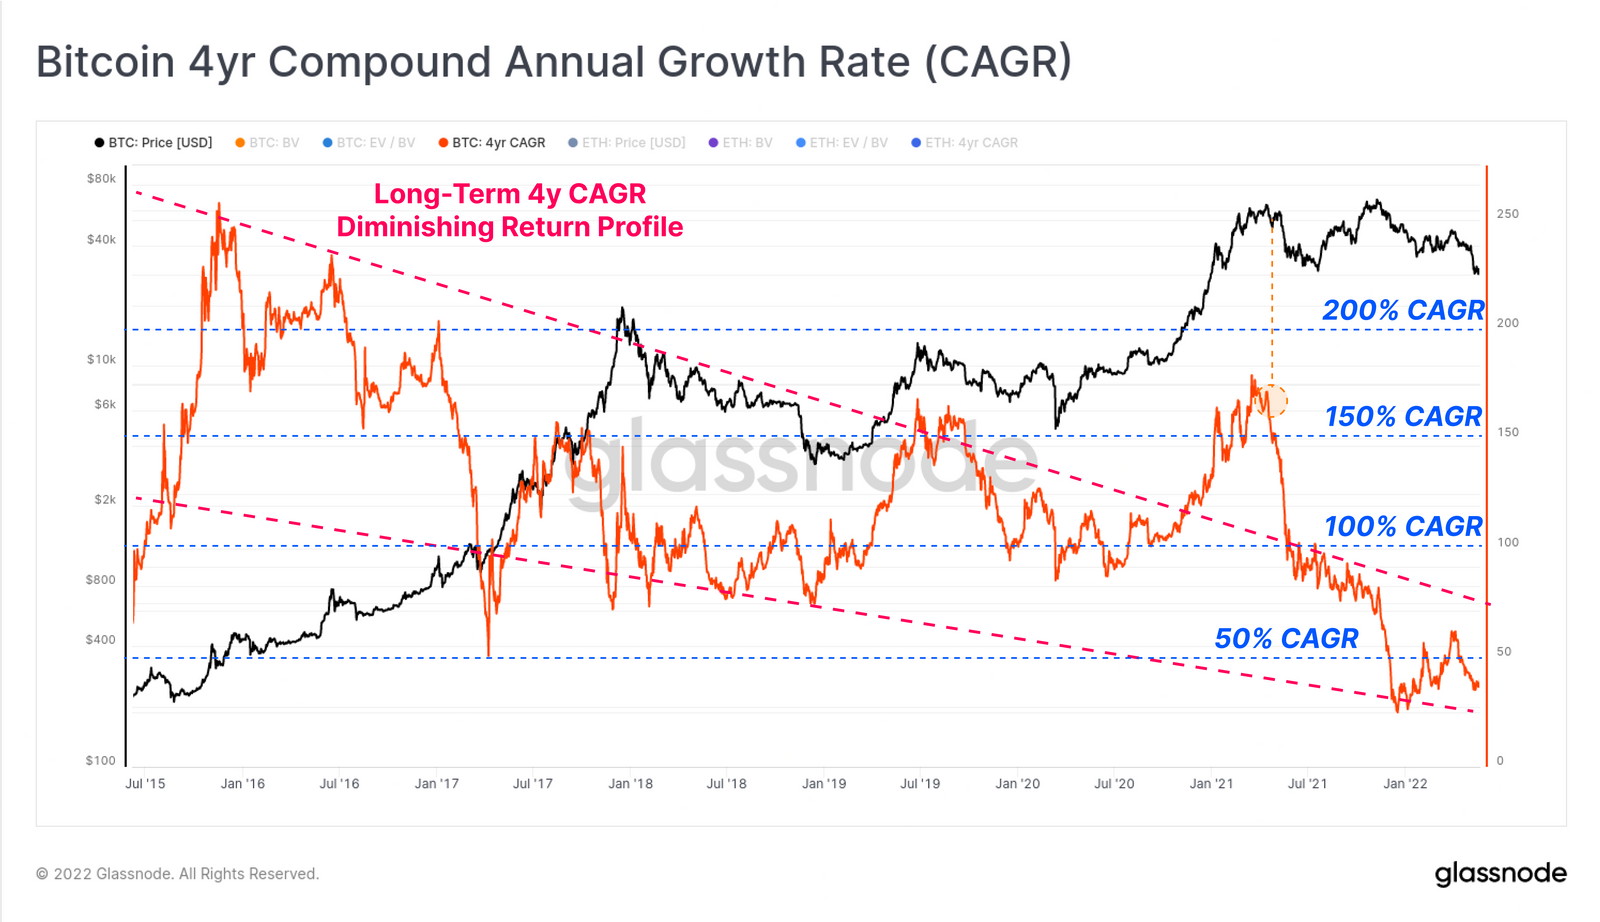 Bitcoin four year Compound Annual Growth Rate (CAGR)